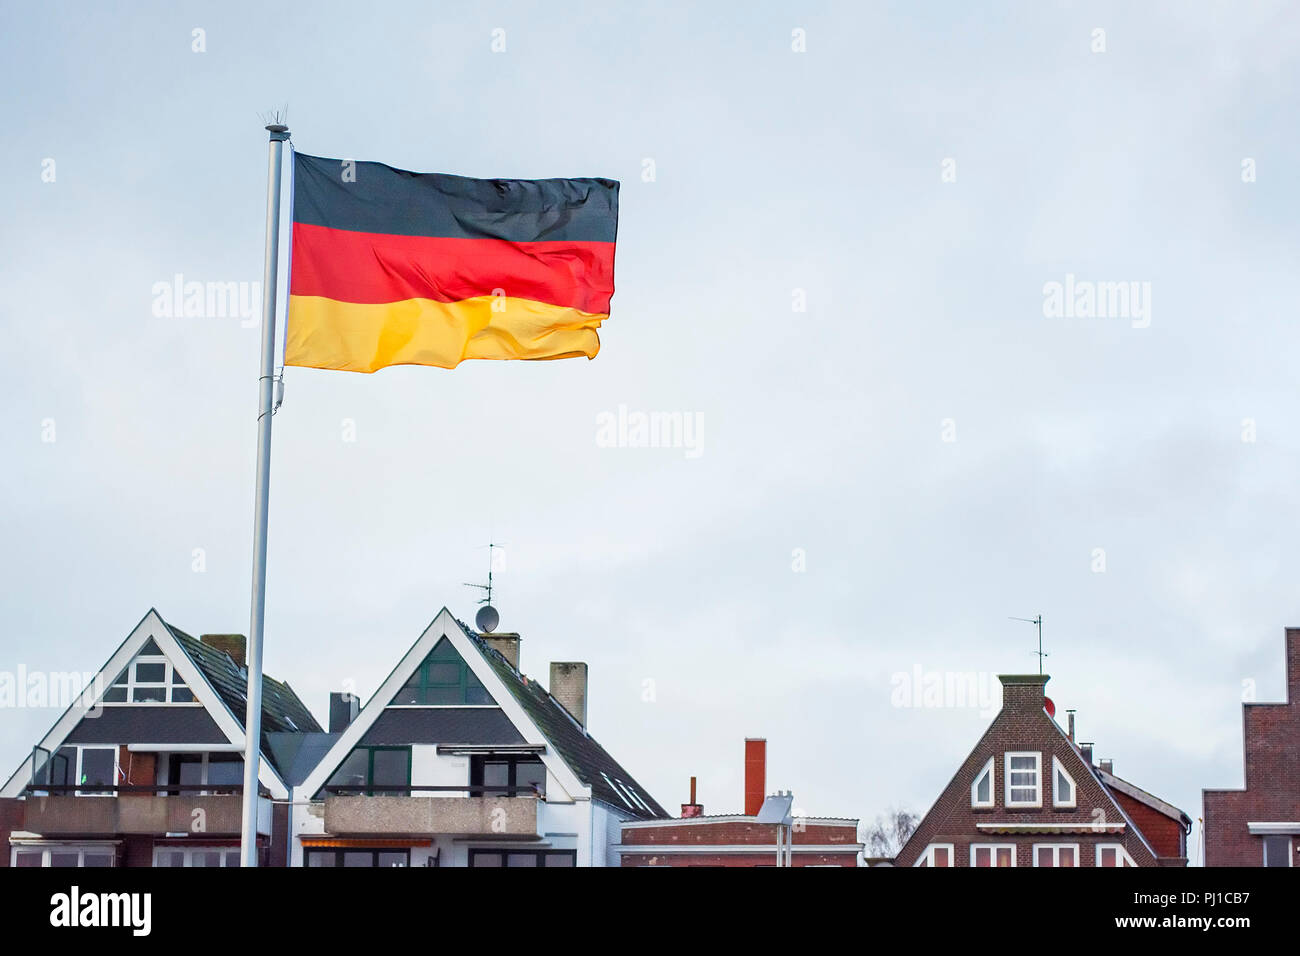 German flag and rooftops, Travemunde, Lubeck, Germany Stock Photo